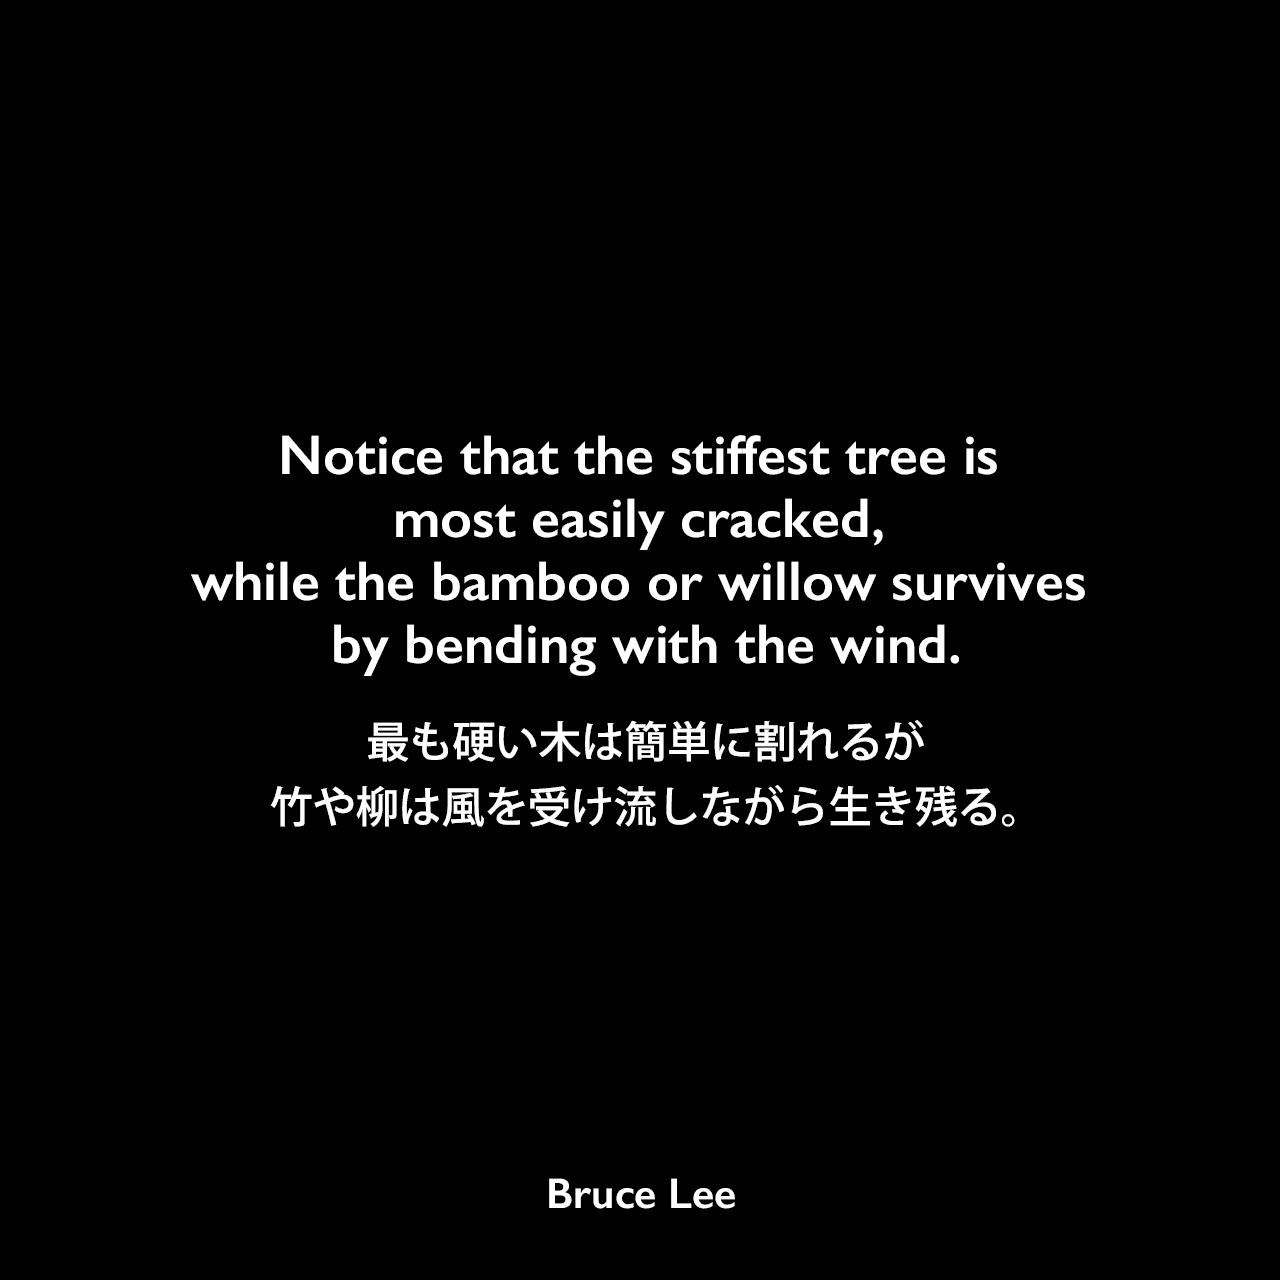 Notice that the stiffest tree is most easily cracked, while the bamboo or willow survives by bending with the wind.最も硬い木は簡単に割れるが、竹や柳は風を受け流しながら生き残る。Bruce Lee